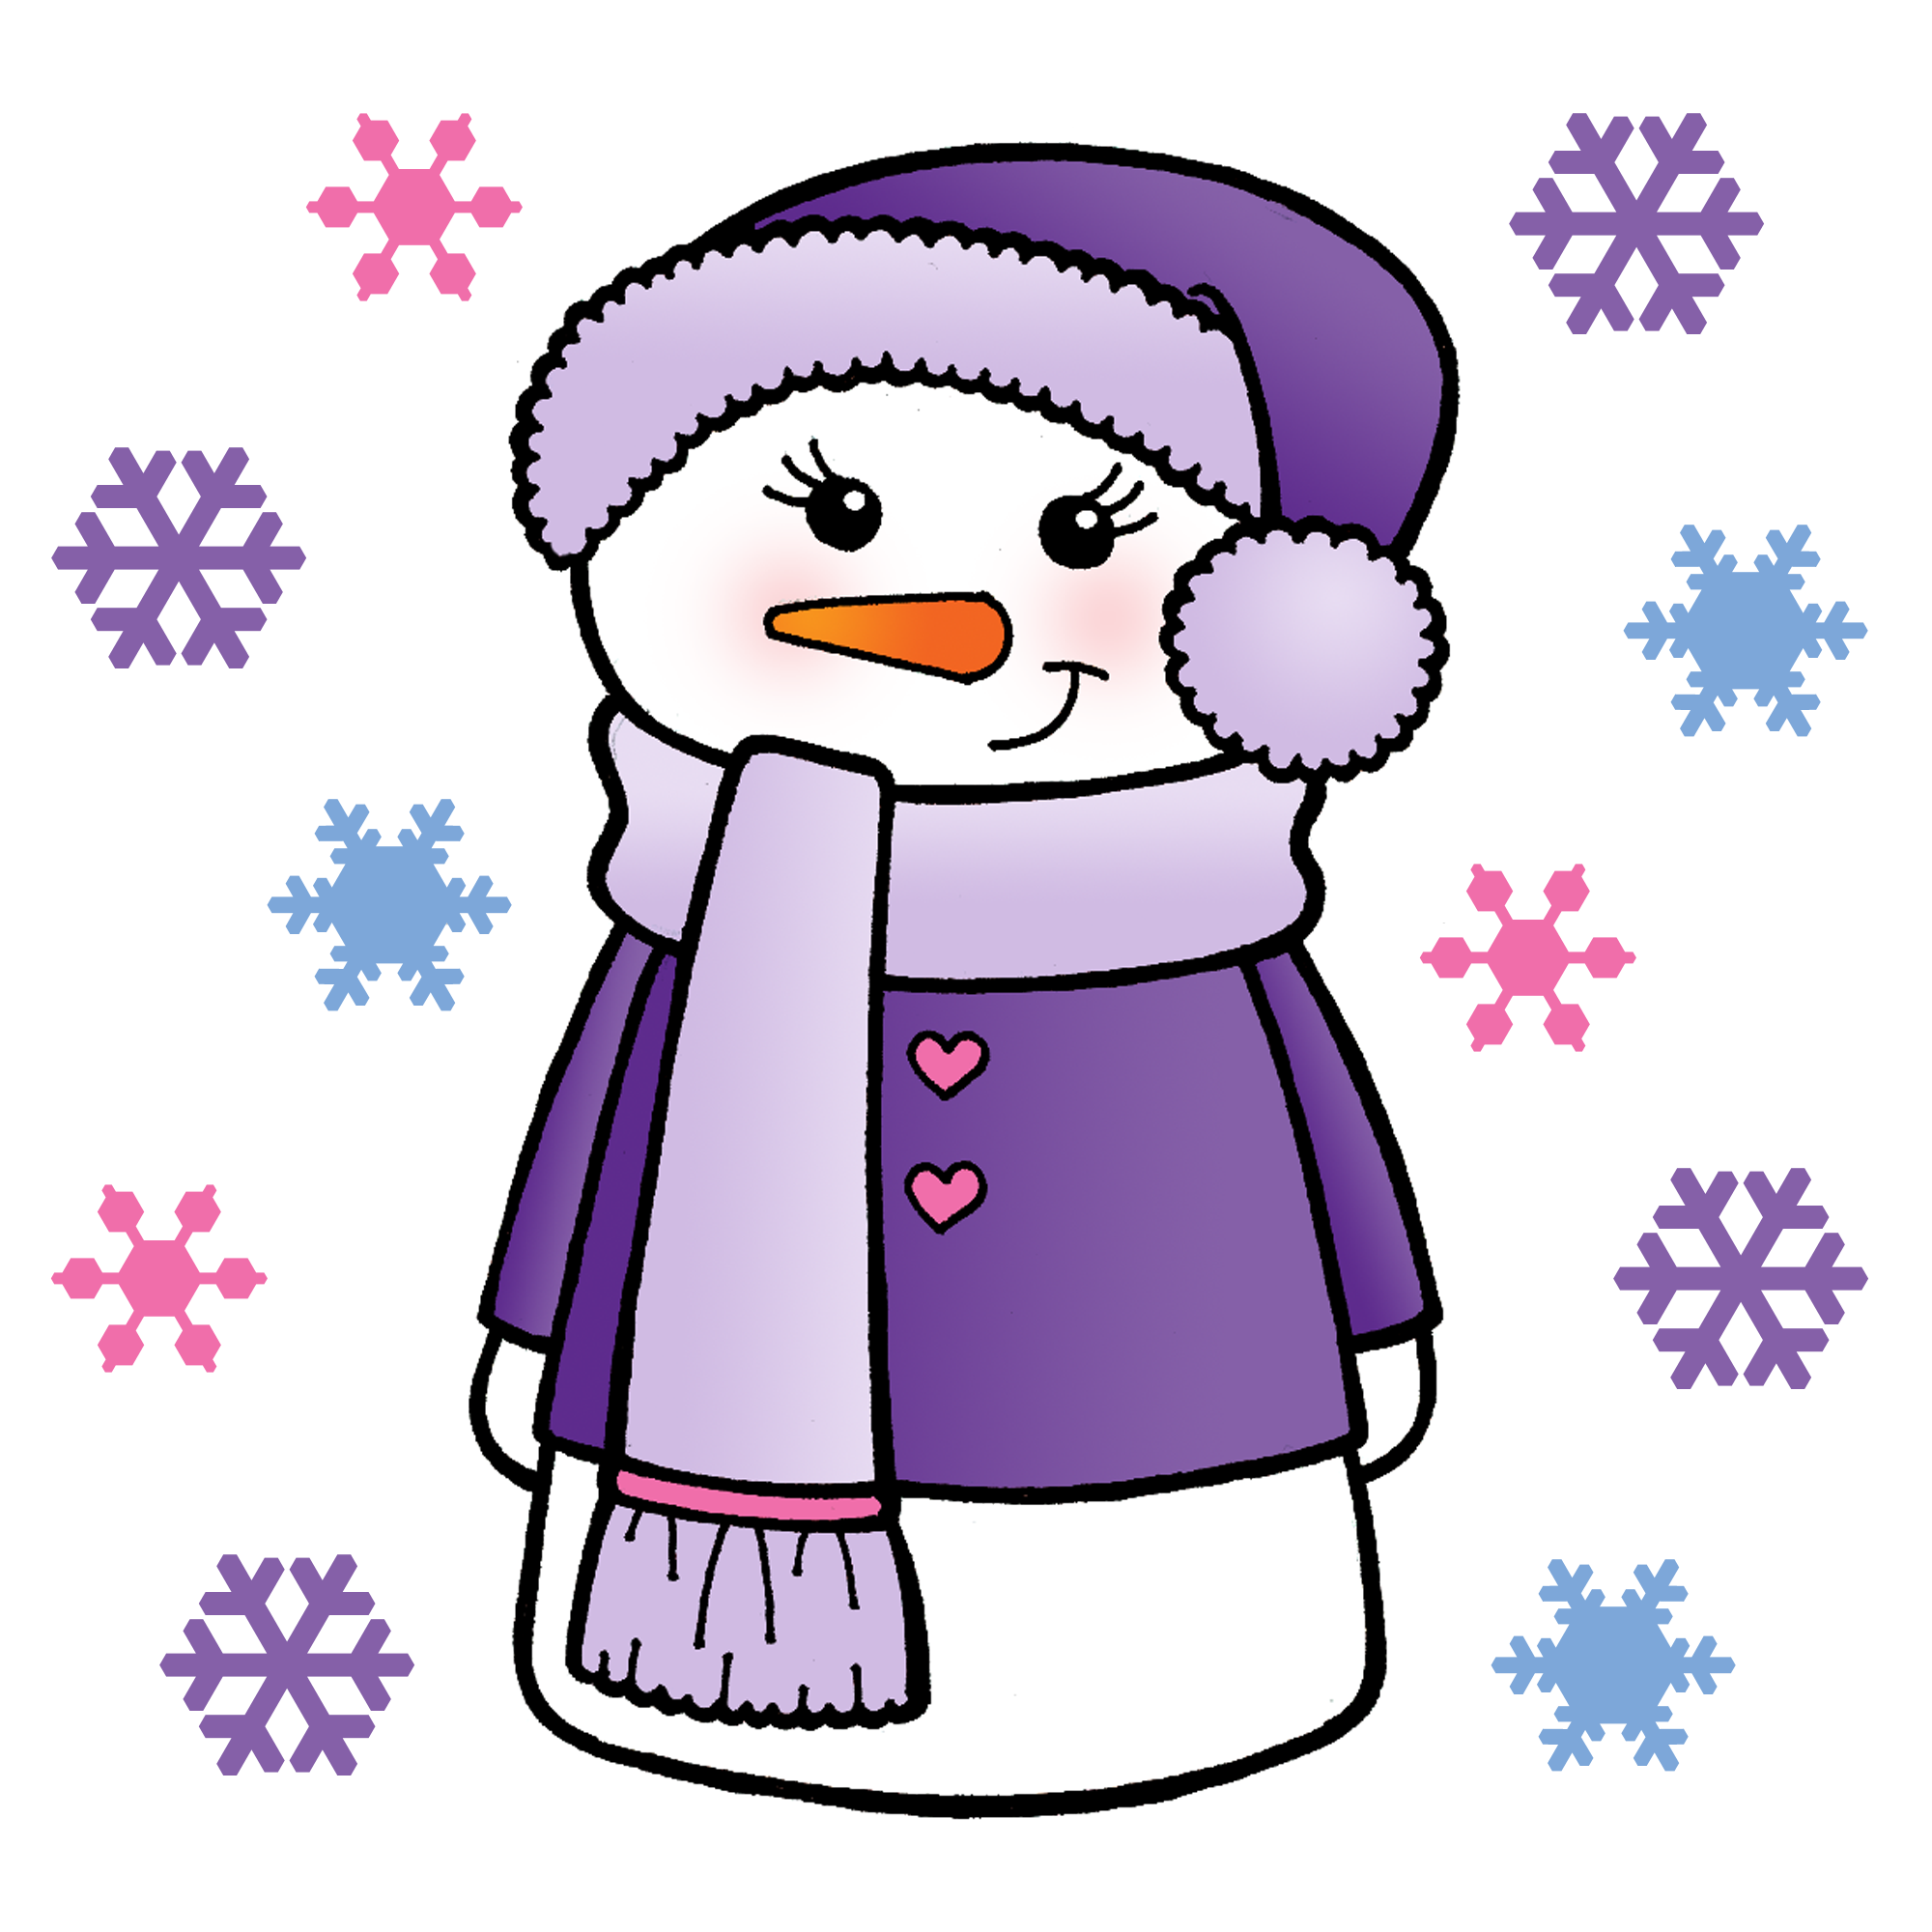 Free images all the. Clipart snow person